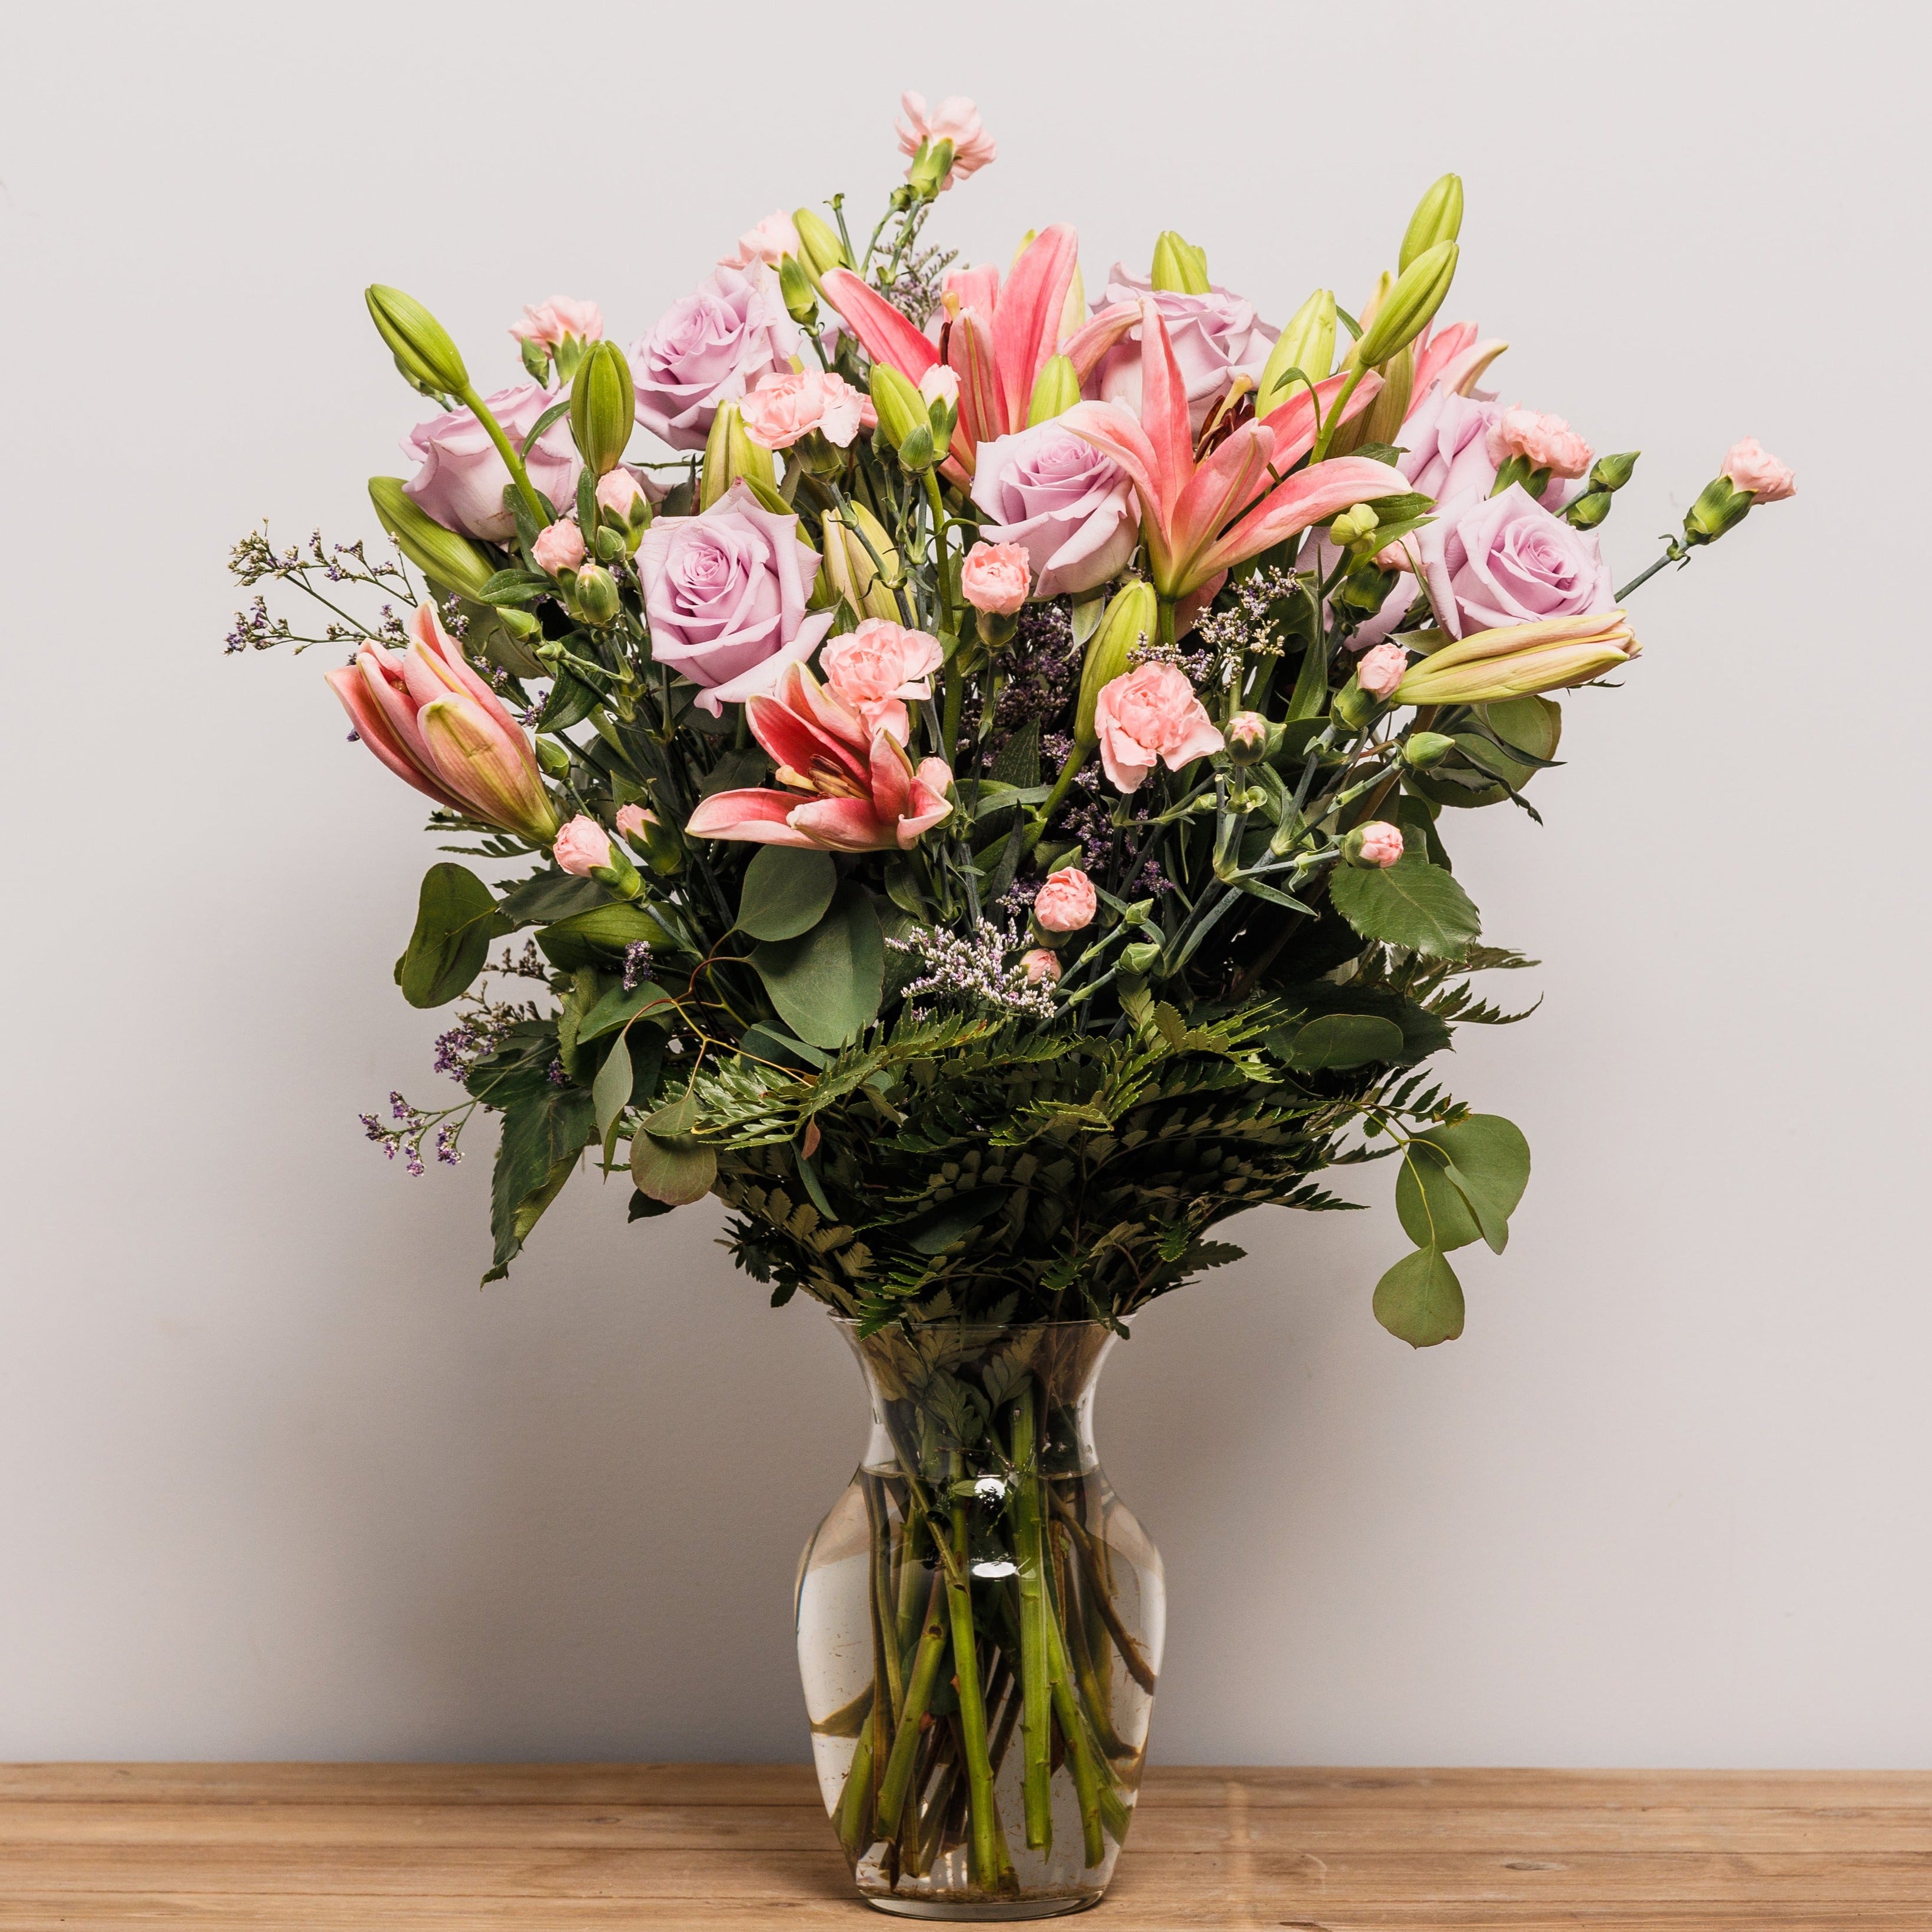 Light pink lilies with lavender roses in a vase.